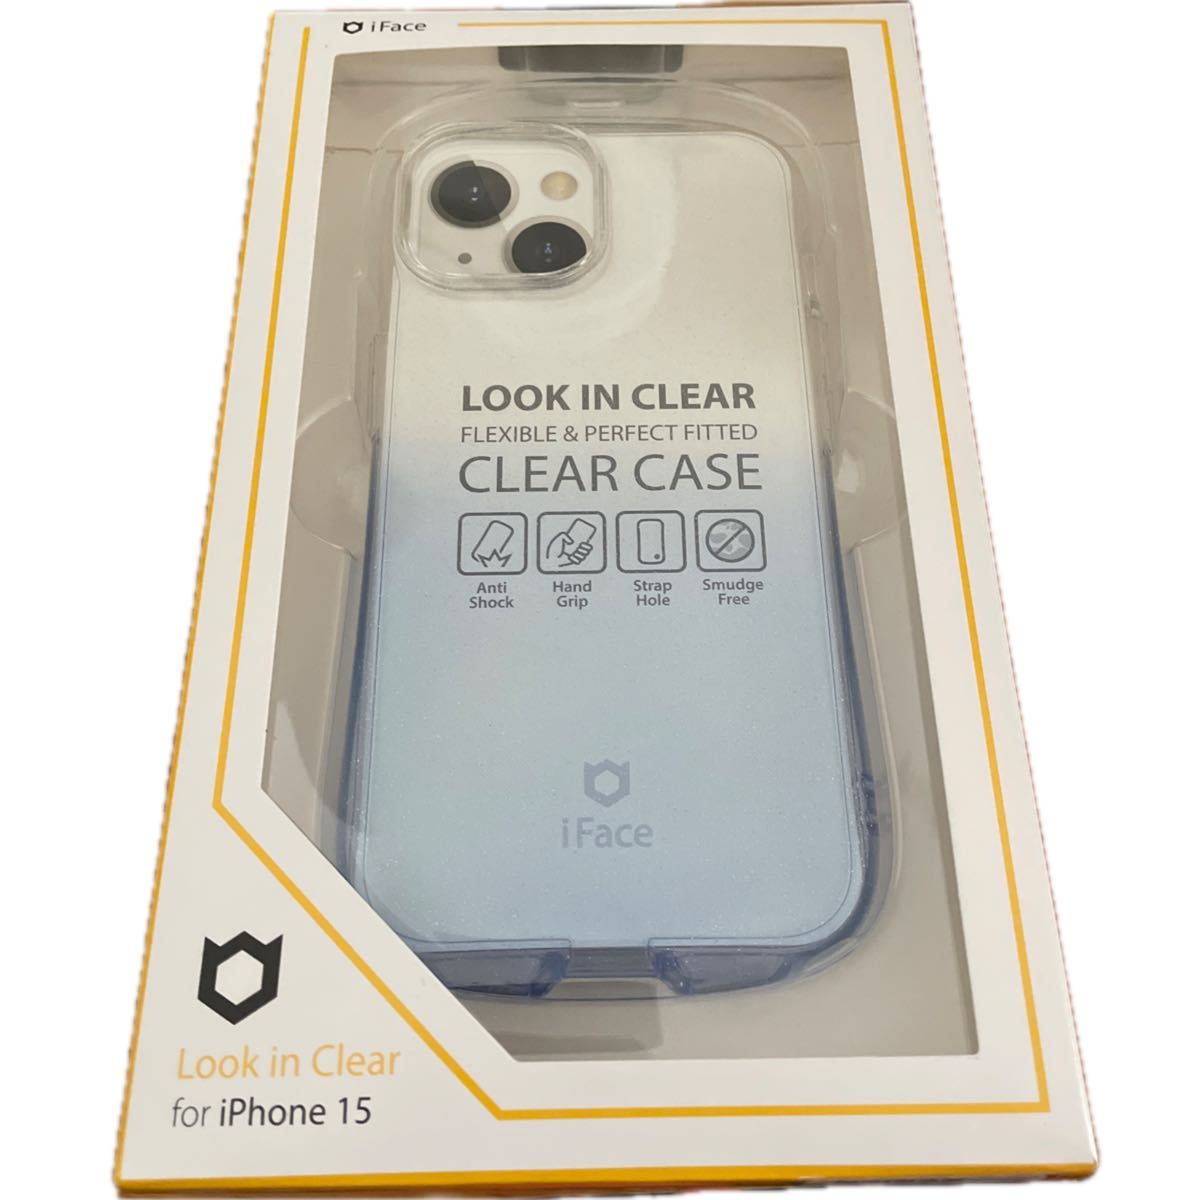 iPhone15 iFace Look in Clear Lolly ケース 41-969502（クリア/サファイア)アイフェイス